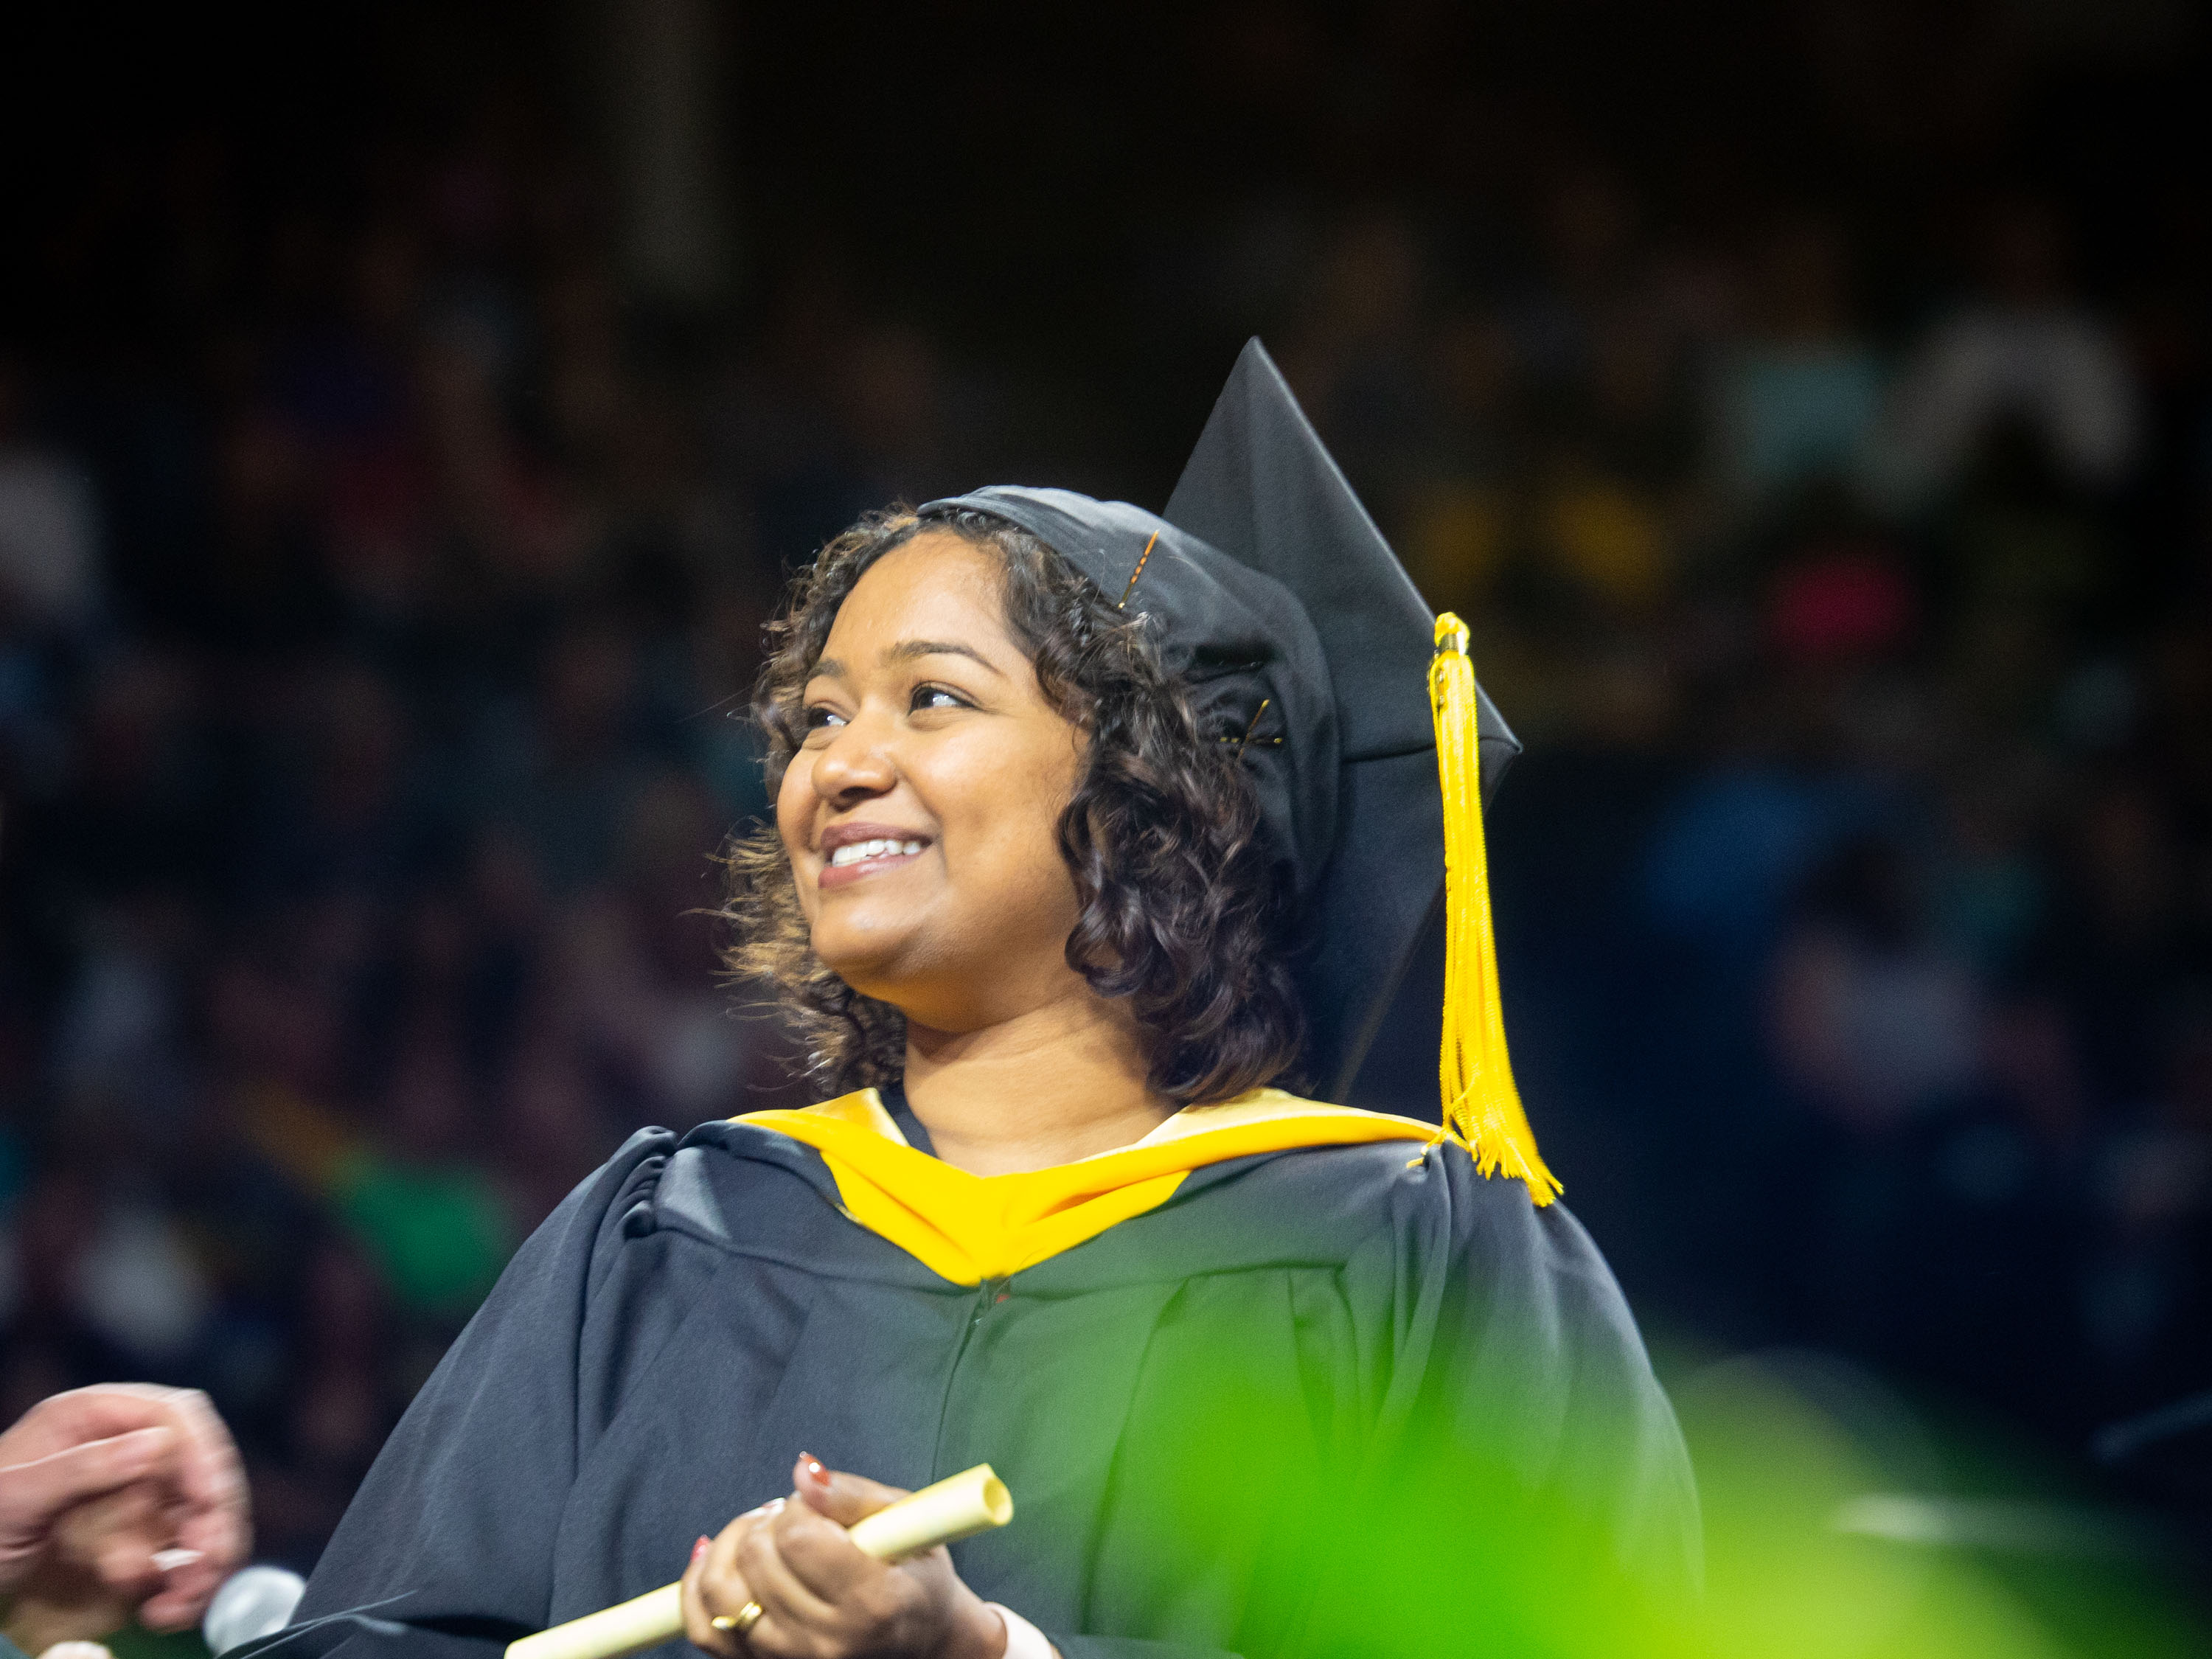 Student receiving her diploma at 2019 spring commencement